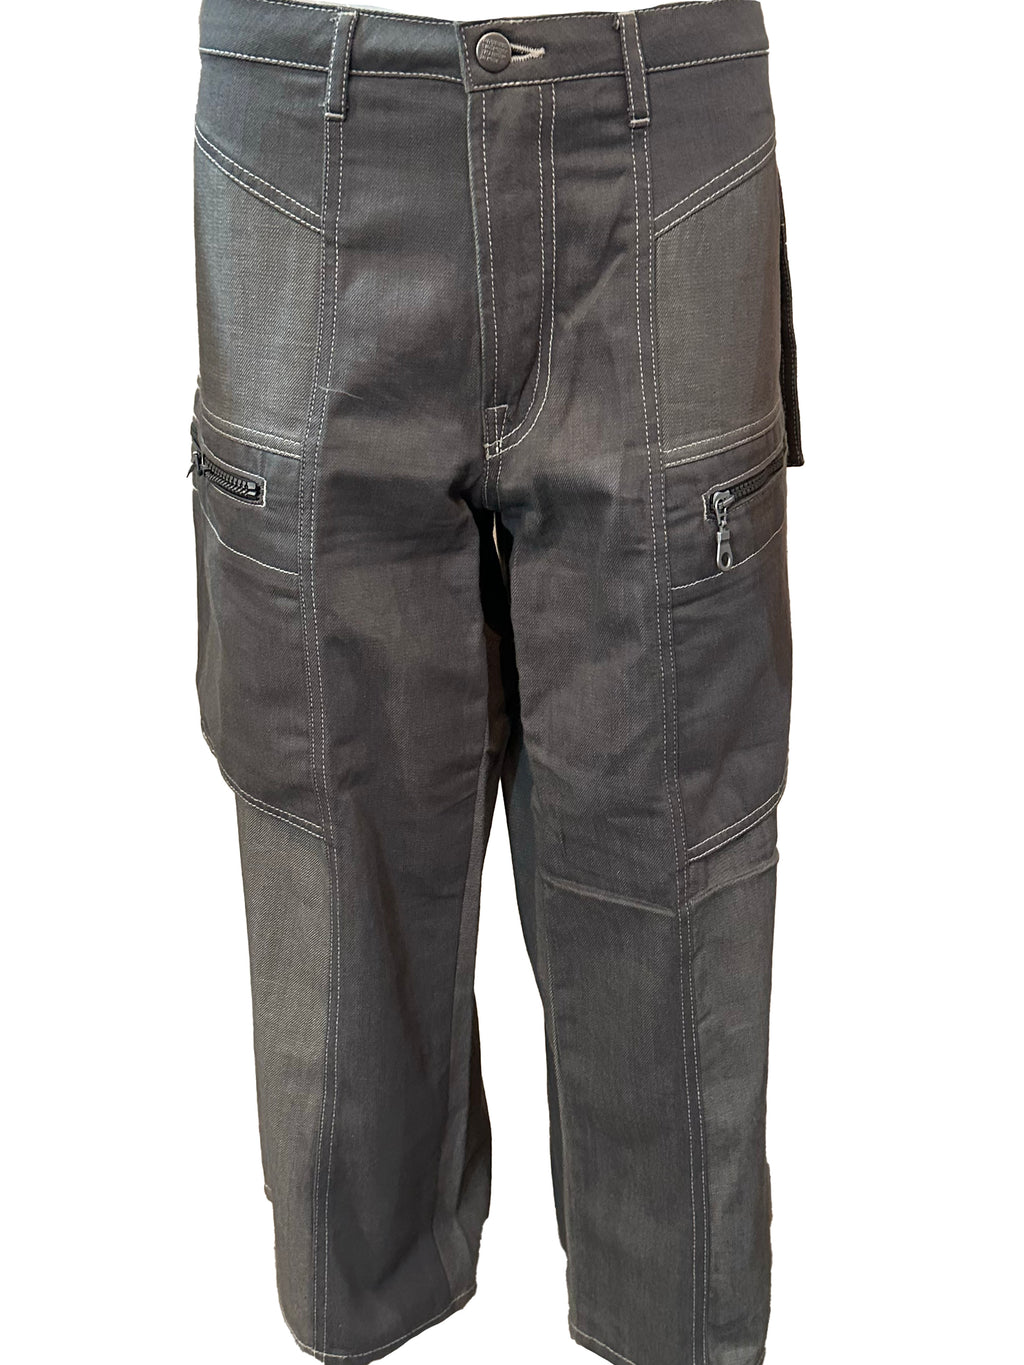  Marithe and Francois Girbaud Y2K Cropped Cargo Pants FRONT  1 of 7